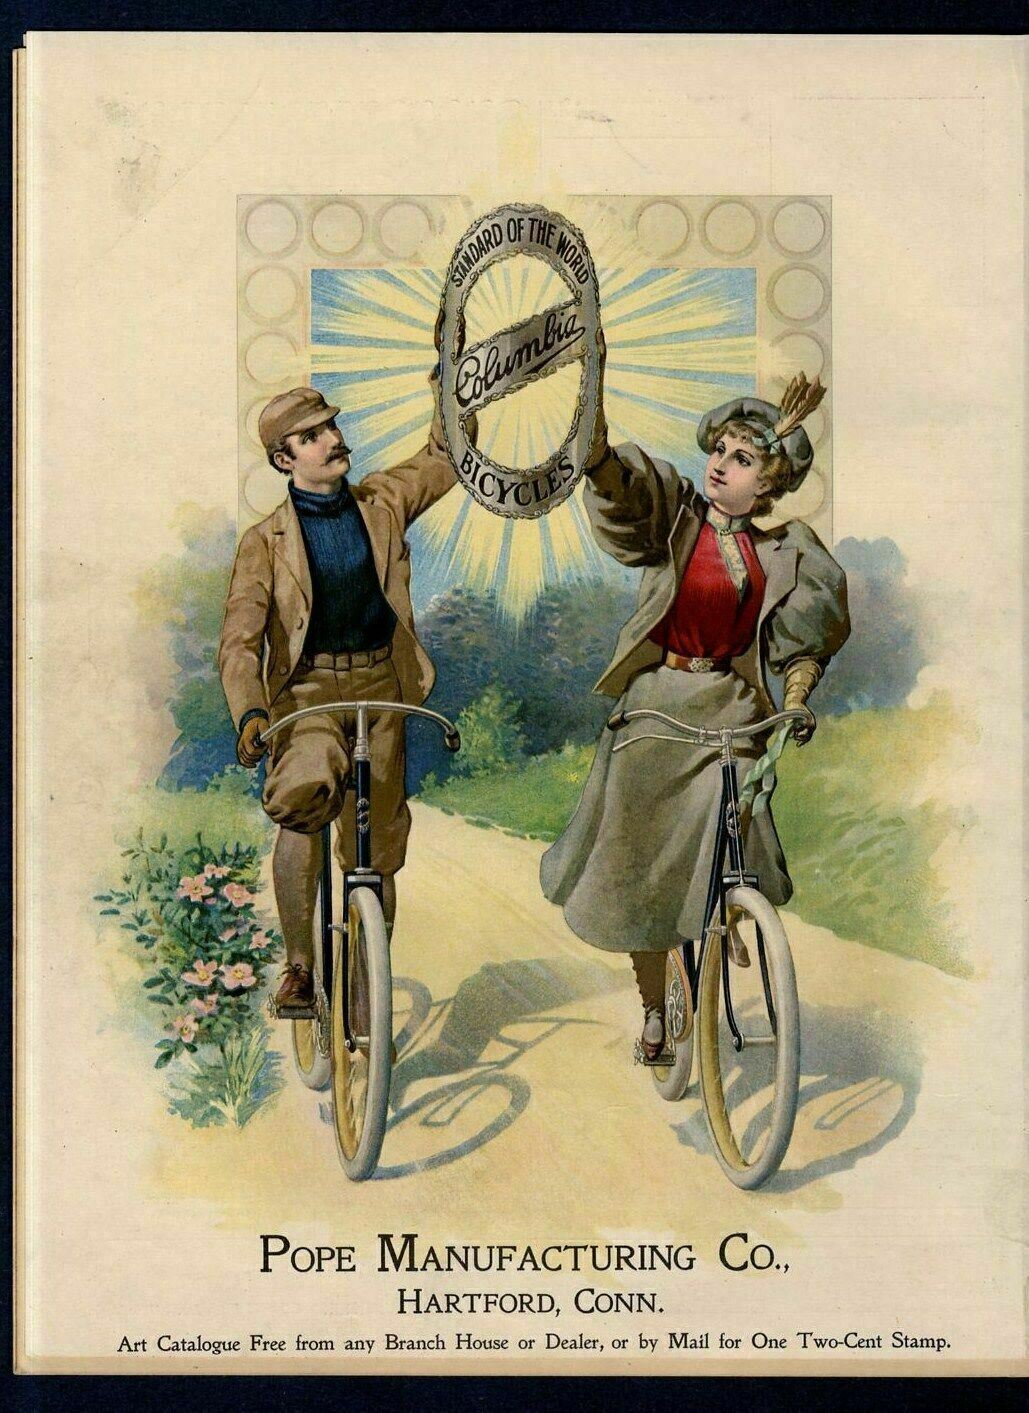 COLUMBIA BICYCLES STANDARD OF THE WORLD POPE MANUFACTURING 1897 ADVERTISEMENT